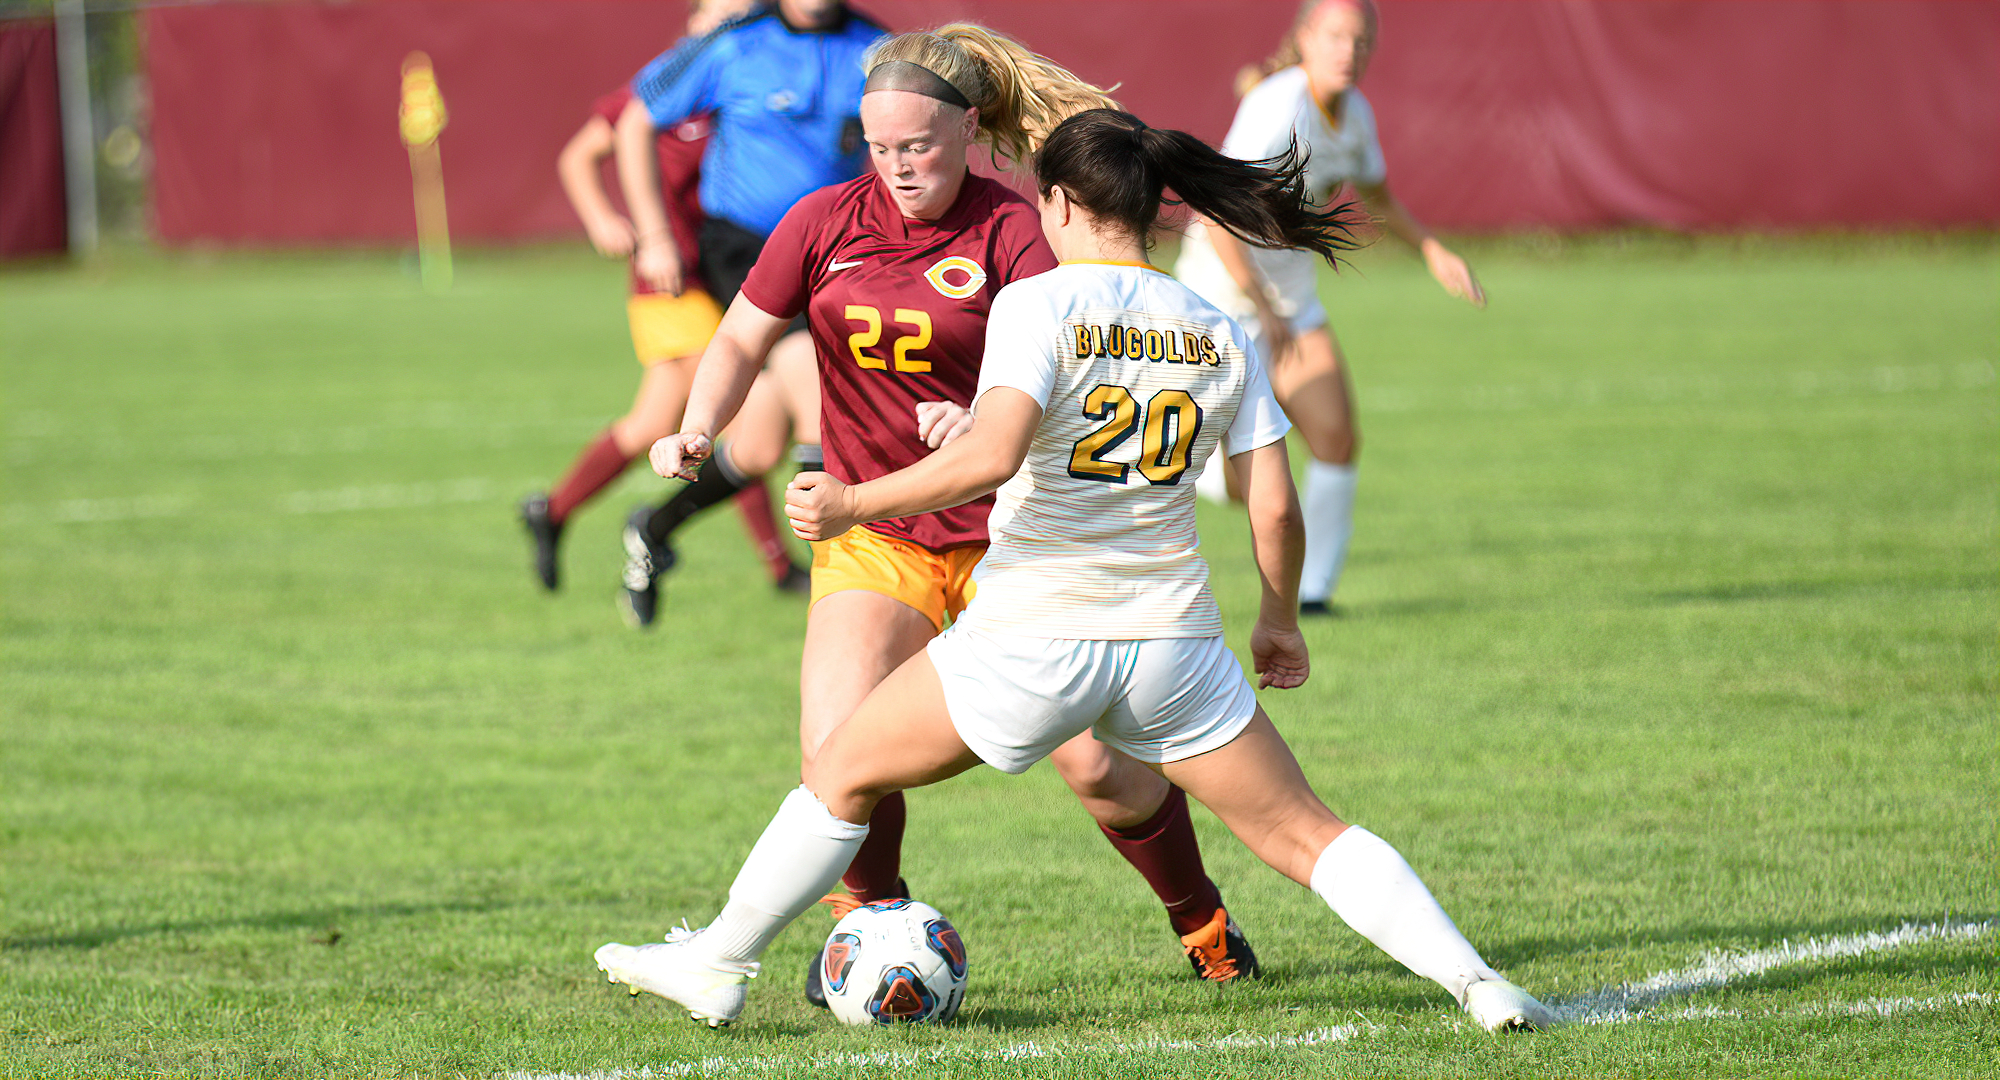 Senior Samantha Dalsin pulls away from a Wis.-Eau Claire defender before scoring the Cobbers' lone goal in their home opener.